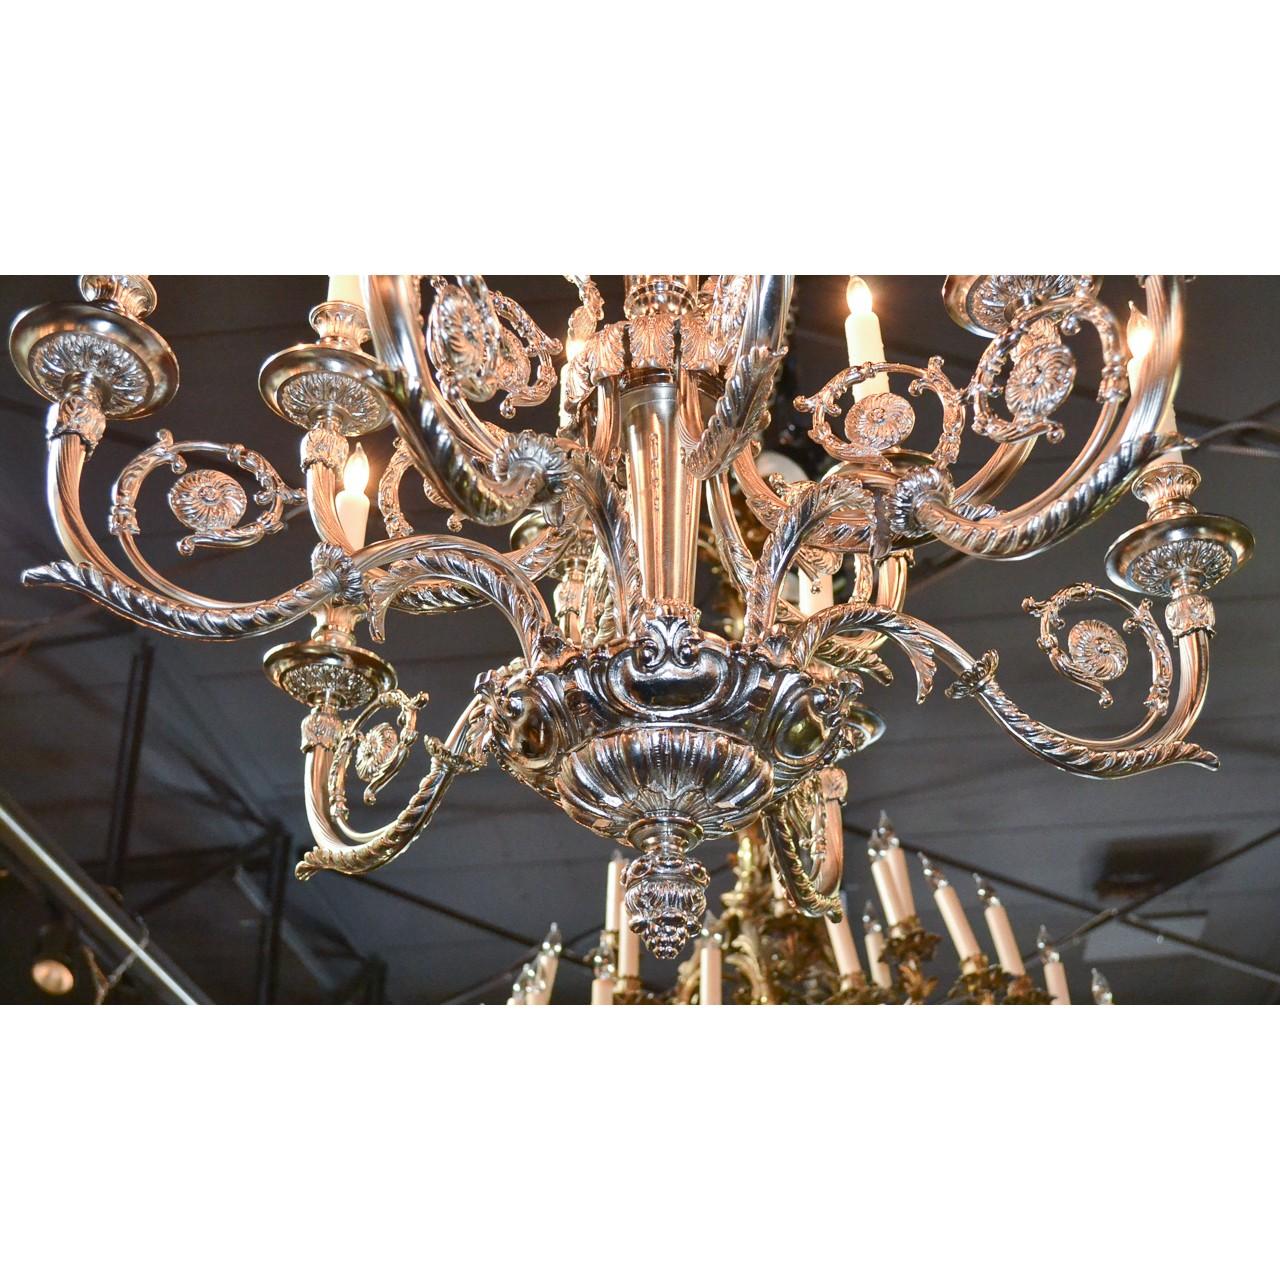 Phenomenal French Louis XV style silver-plate on bronze twelve-light chandelier of paragon quality. The foilate canopy atop exquisite cherubic and acanthus leaf surmounts. The trumpet vase shaped stem adorned with twelve ornately scrolled arms with